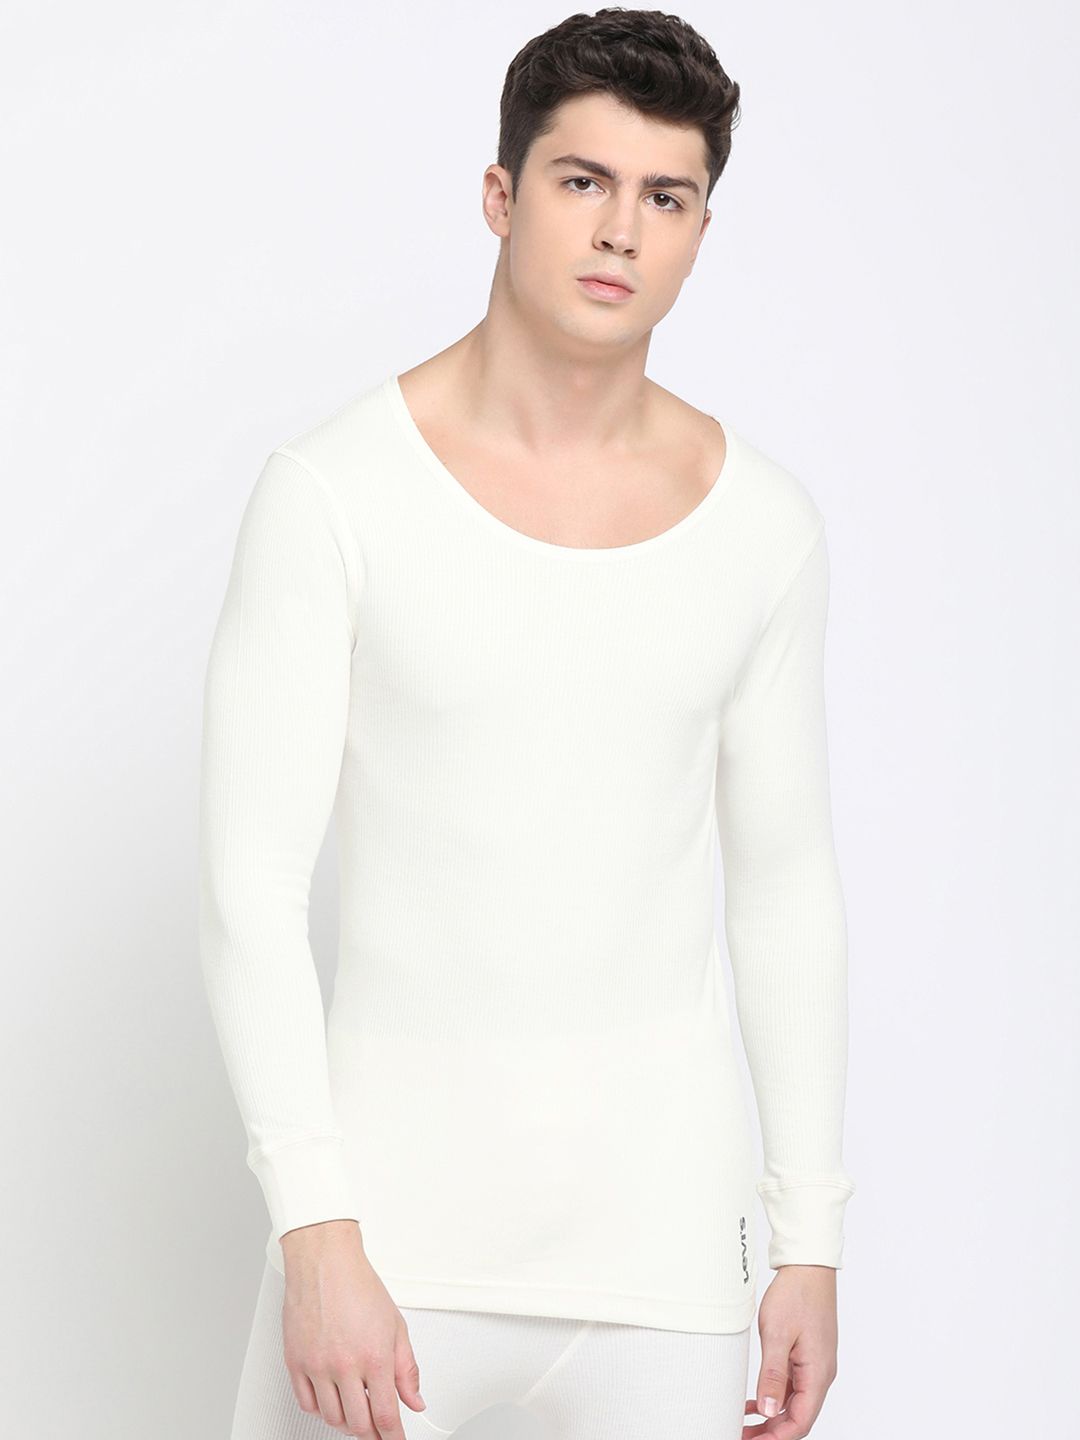 Levis Men Off-White Solid Thermal Top Price in India